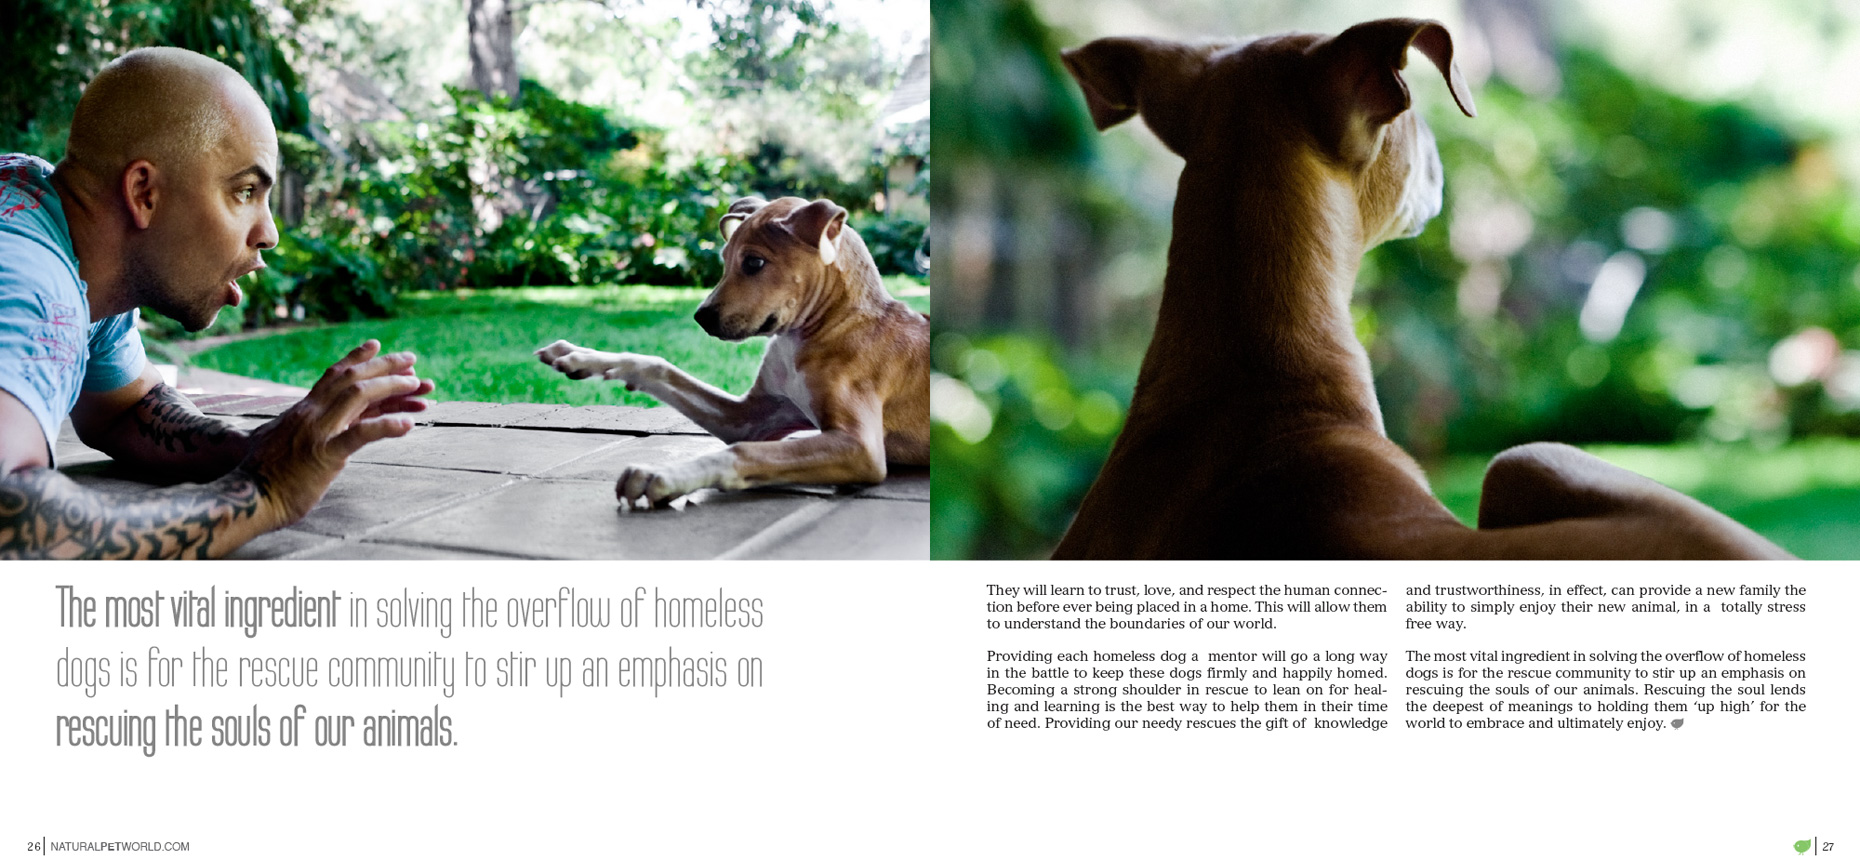 Los Angeles Dog Photography, Michael Brian, Tyson Kilmer, Dog Trainer, Rescuing the Soul